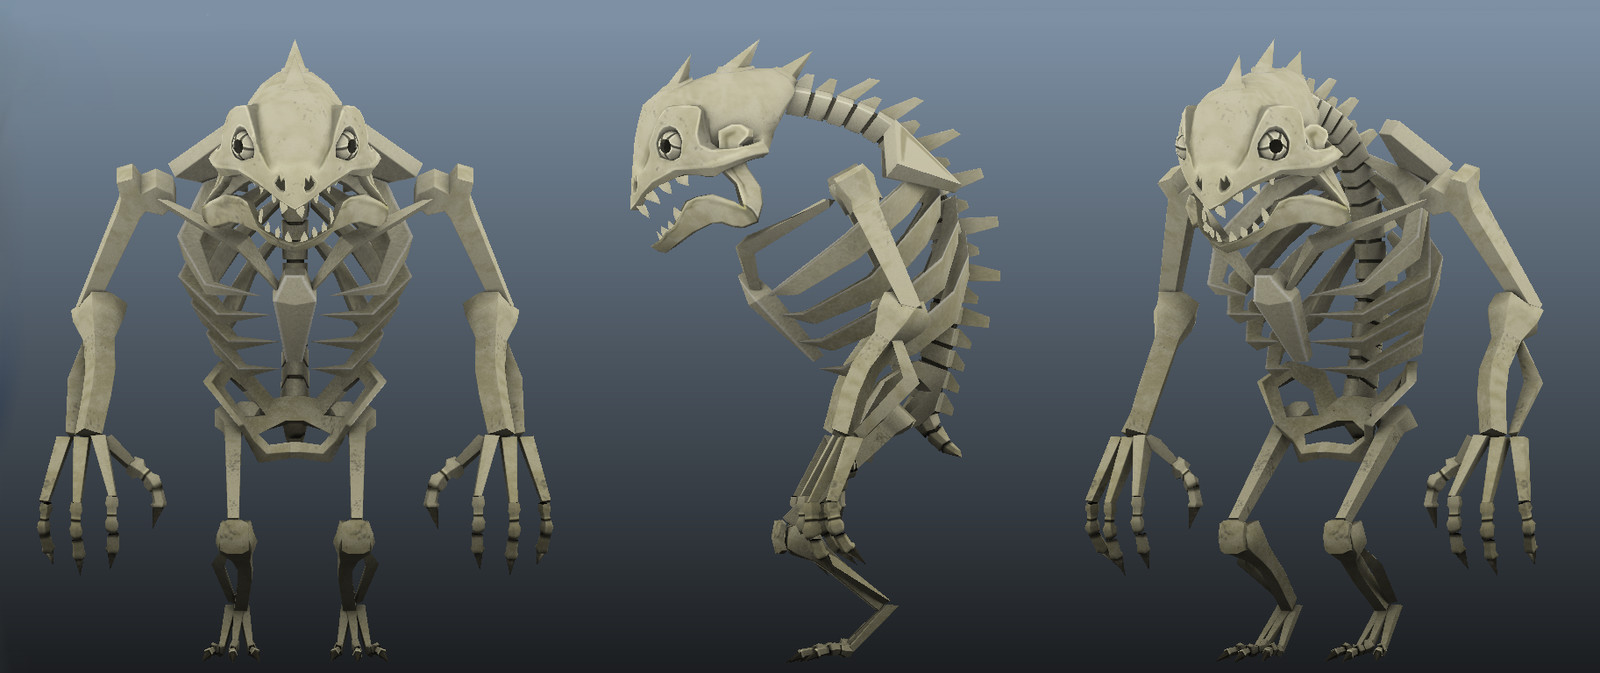 The Skeletal Gemeater. I made him in my off time at work, and I'm glad he made it into the Brutal Edition of the game!